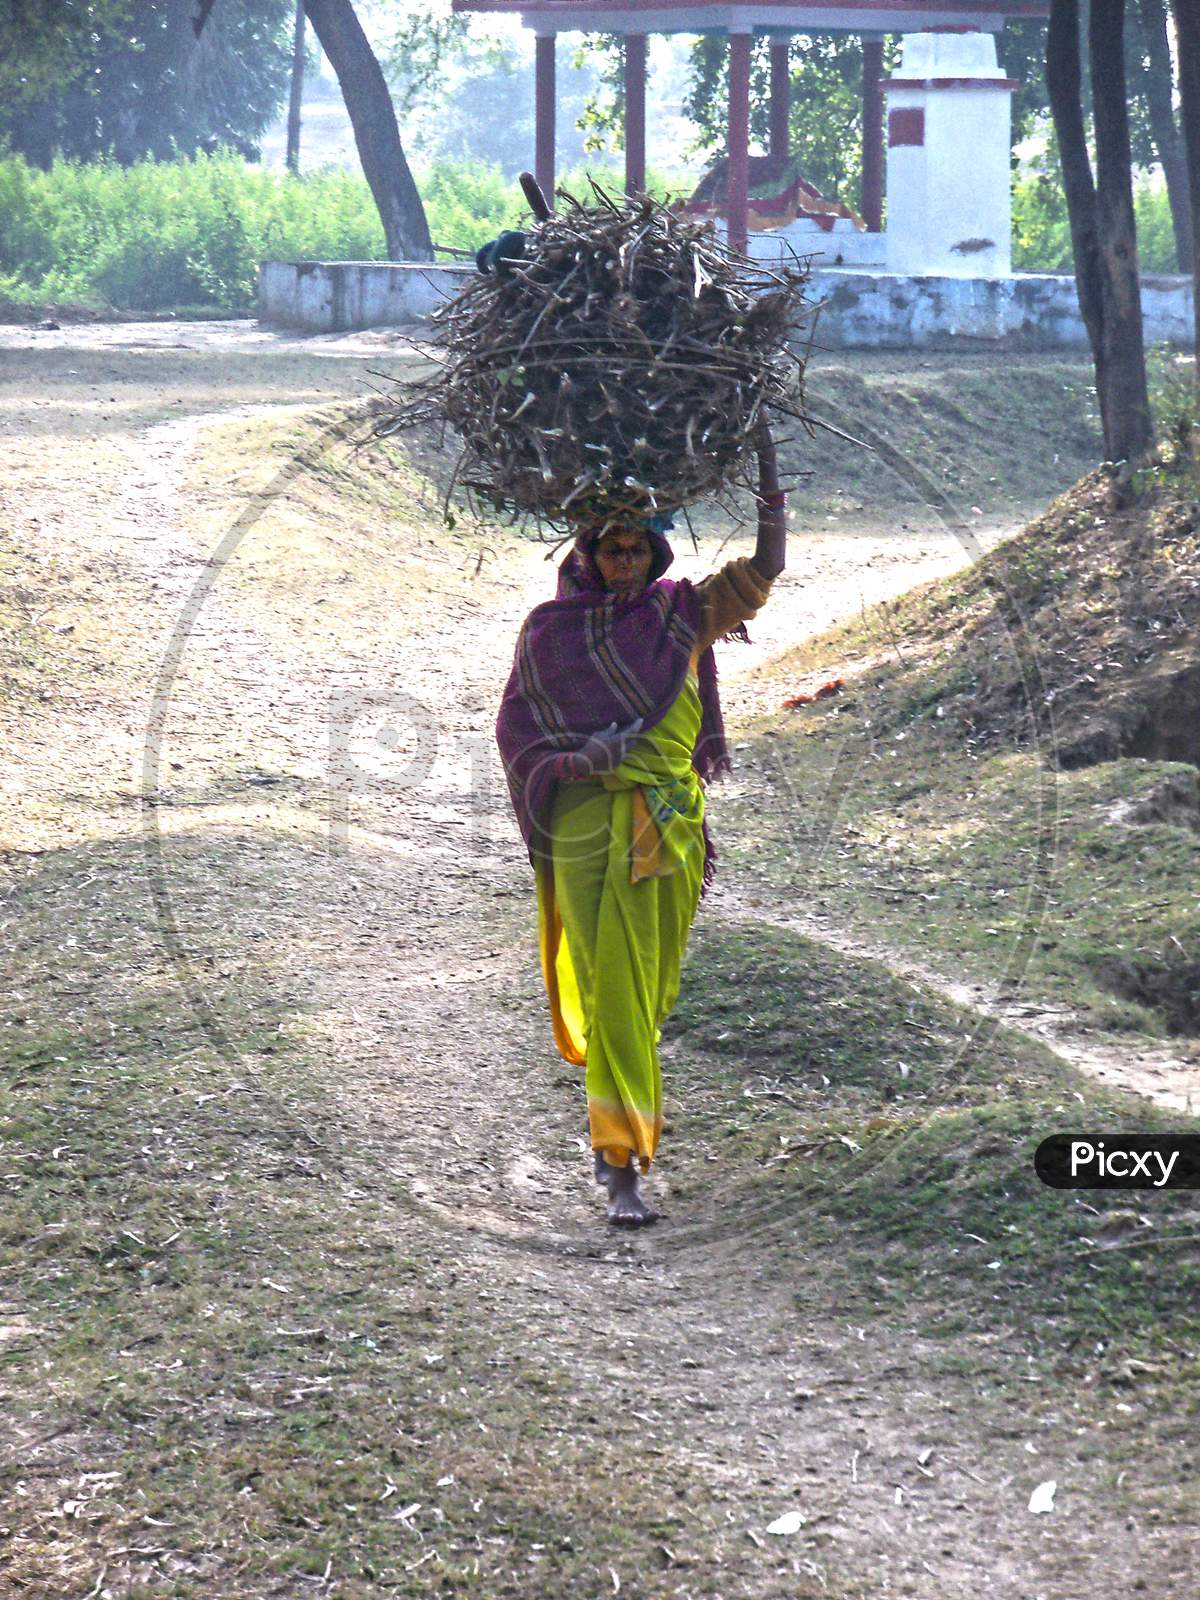 A poor lady carry dry woods for cooking